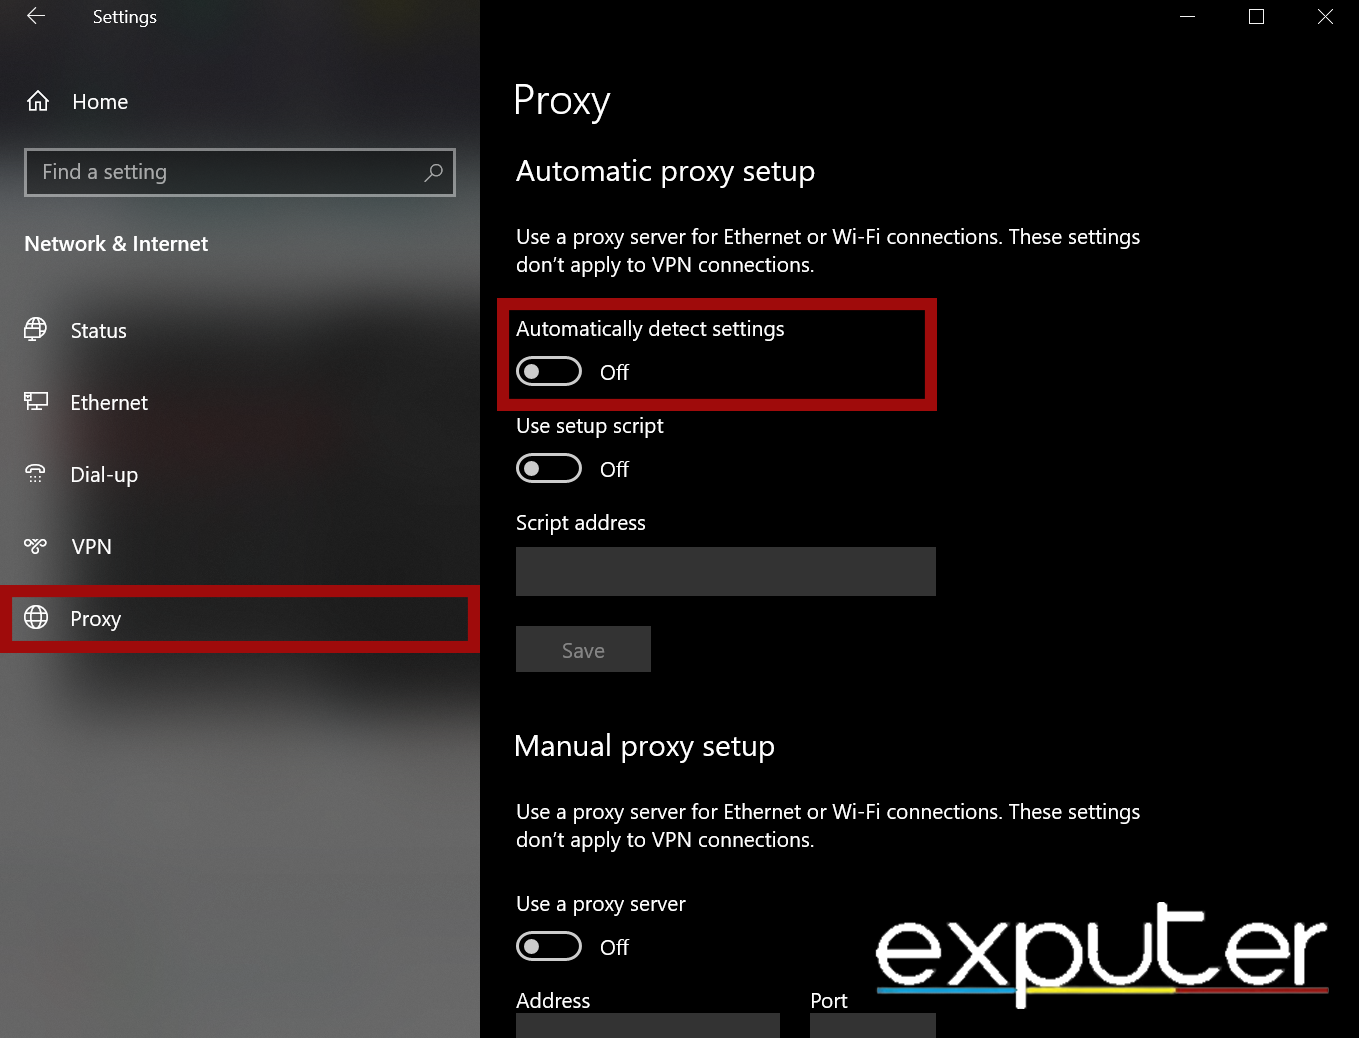 Turning off Automatic Proxy setting Detection in Network and Internet Settings in the Settings app. (image captured by eXputer)